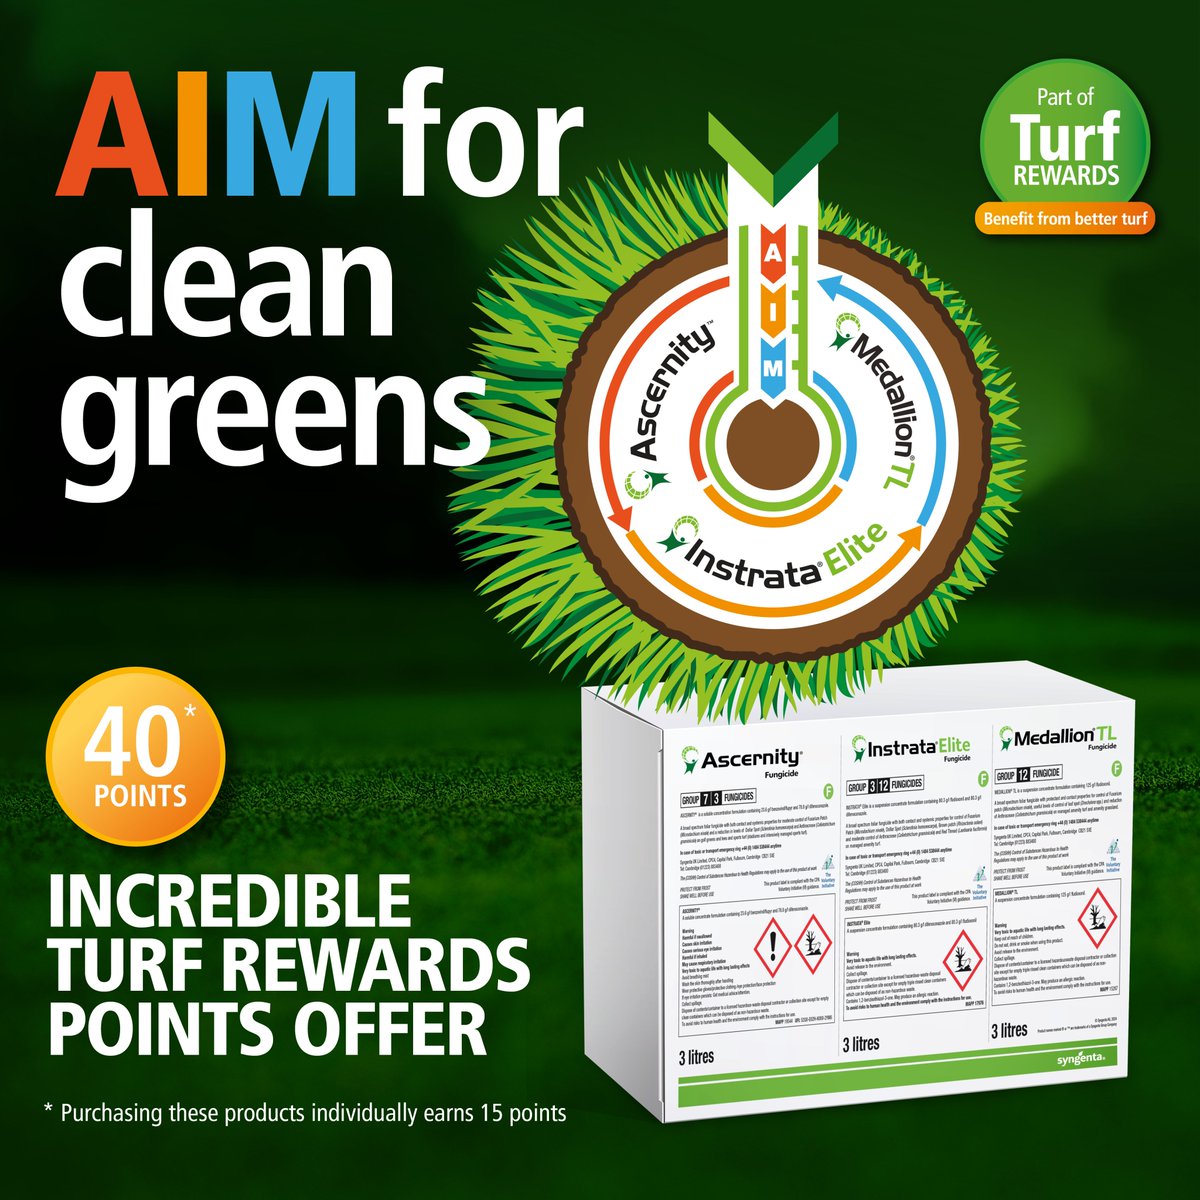 The AIM Pack not only effectively combats turf diseases but also sets you up for success through the Turf Rewards programme. The initial 40 Turf Rewards points, plus the potential to earn more, offer great opportunities to enhance turf management. Learn how to maximise these…